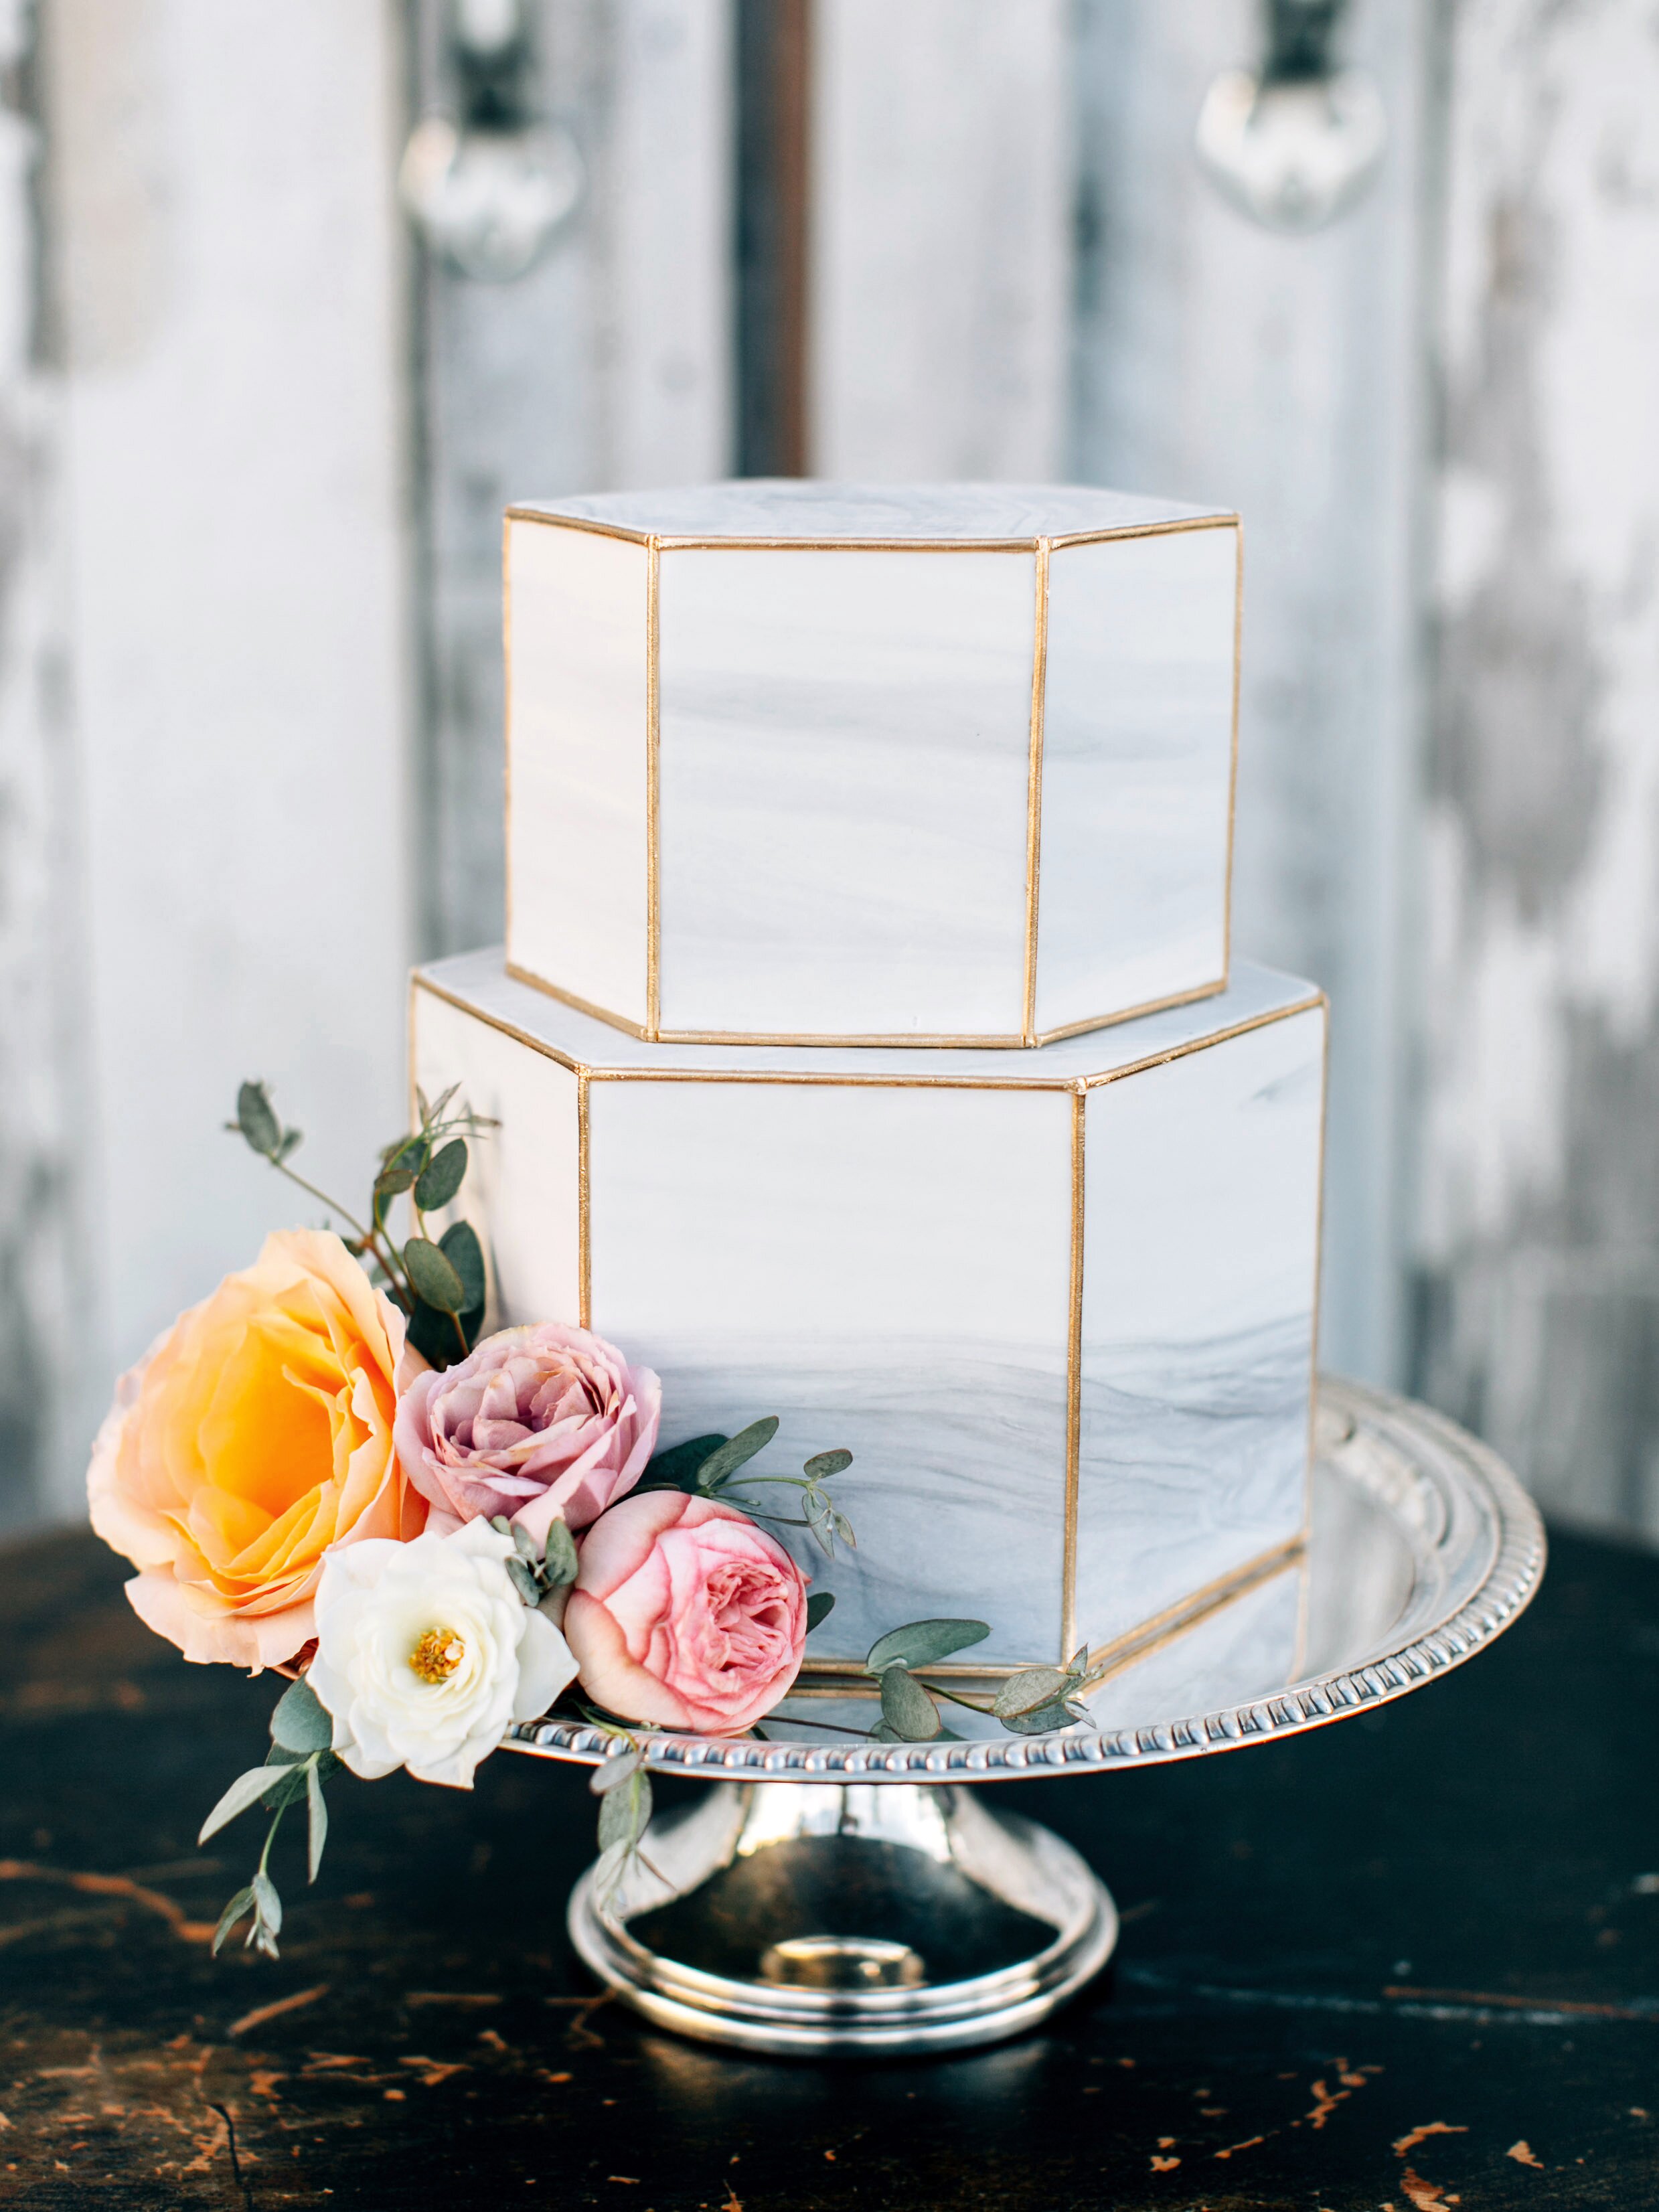 25 Wedding Cake Design Ideas That Ll Wow Your Guests Martha